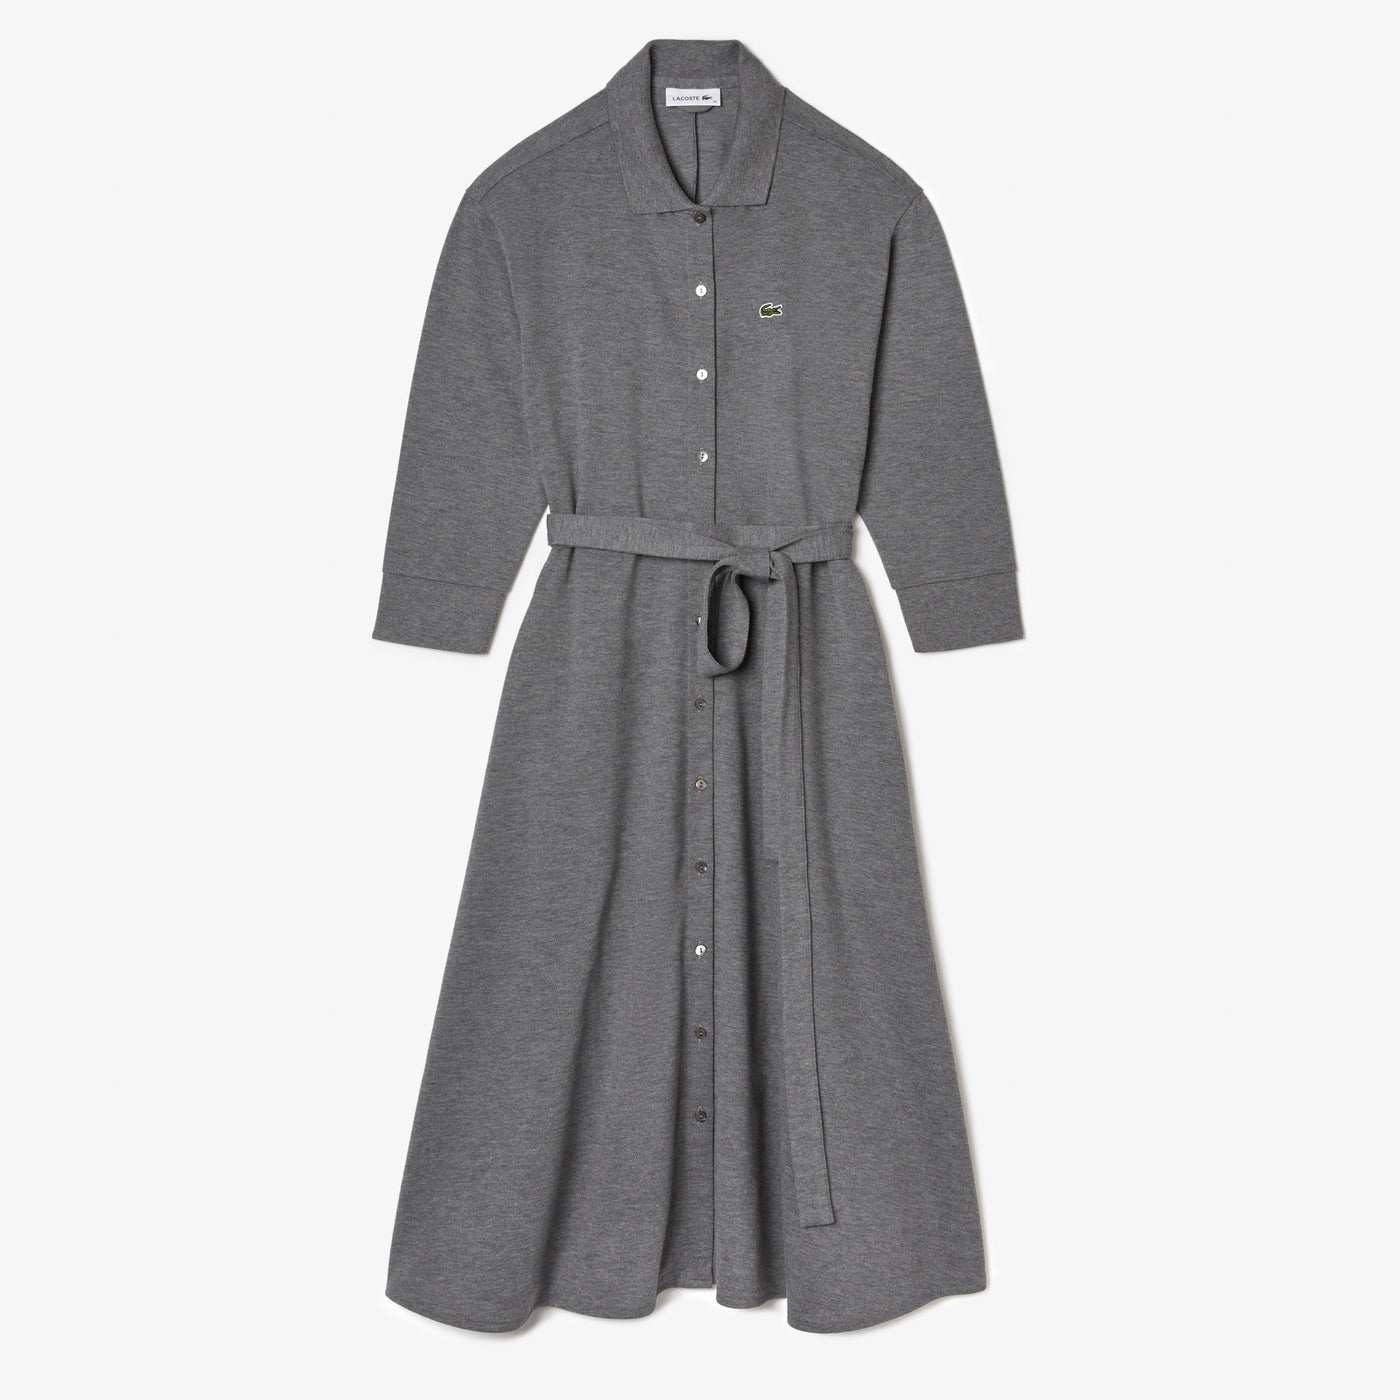 Shop The Latest Collection Of Outlet - Lacoste Women'S Buttoned Belted Cotton Piquã© Polo Dress - Ef2284 In Lebanon